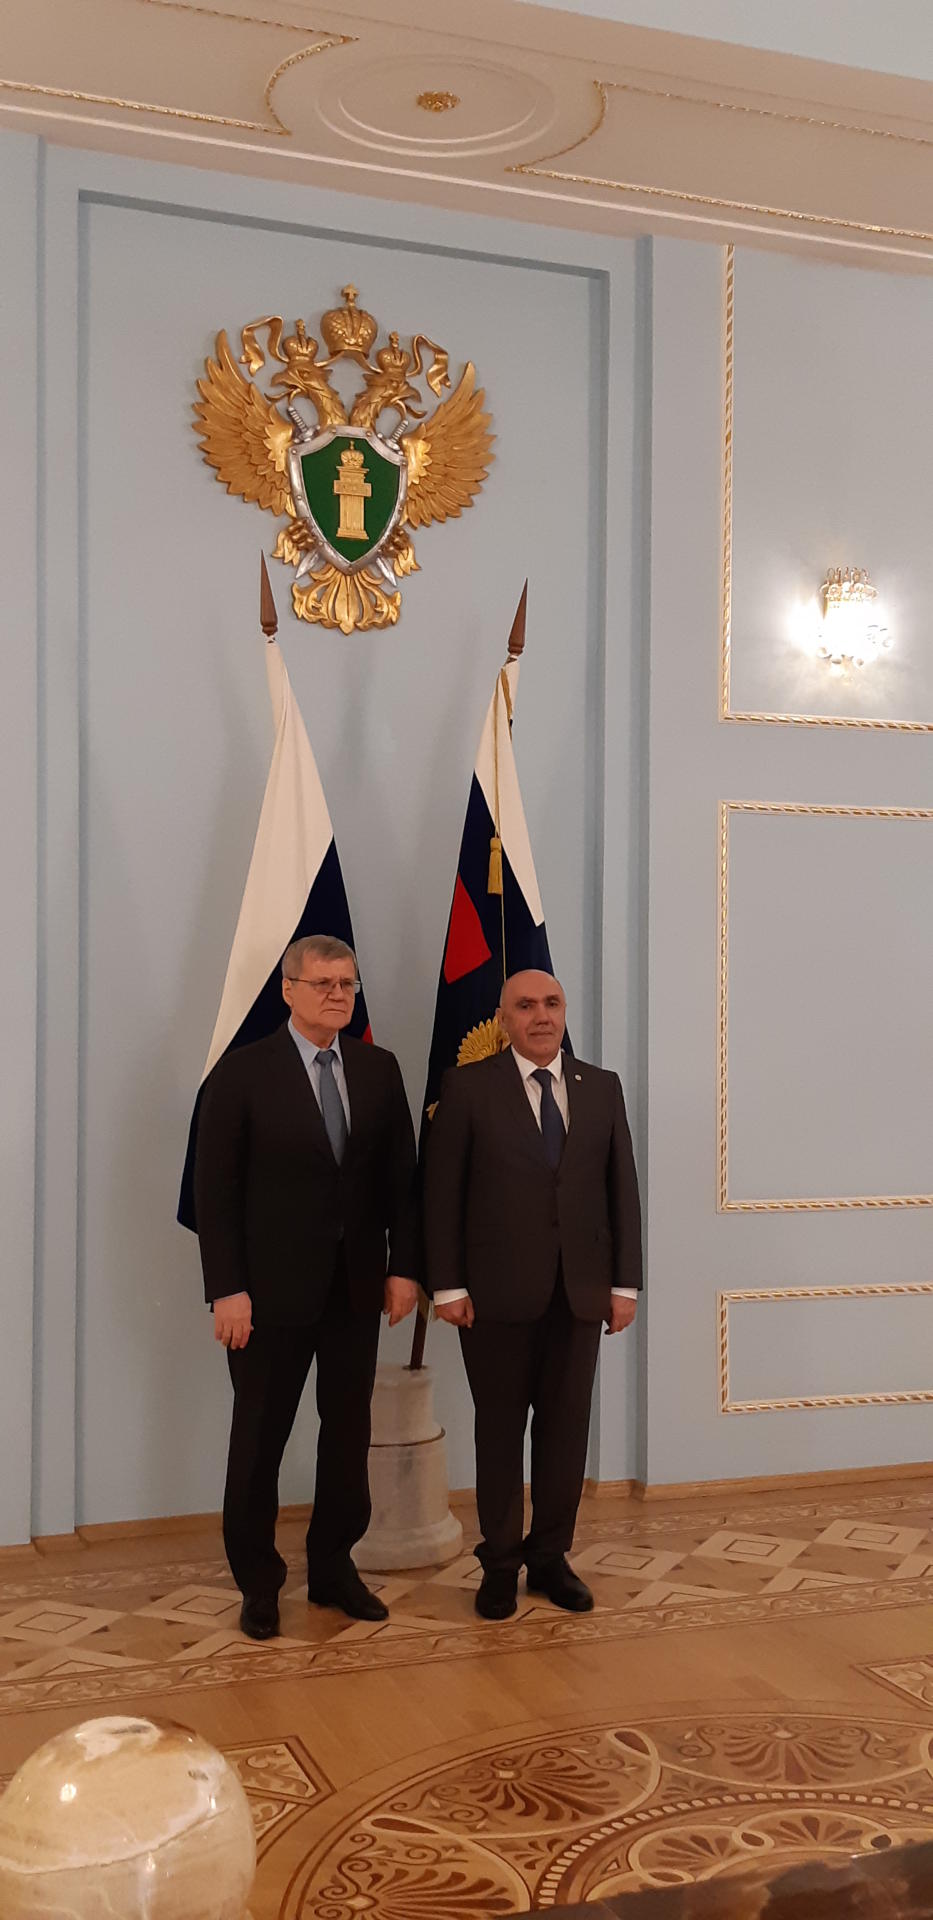 Azerbaijani, Russian prosecutor general’s offices sign co-op agreement (PHOTO)